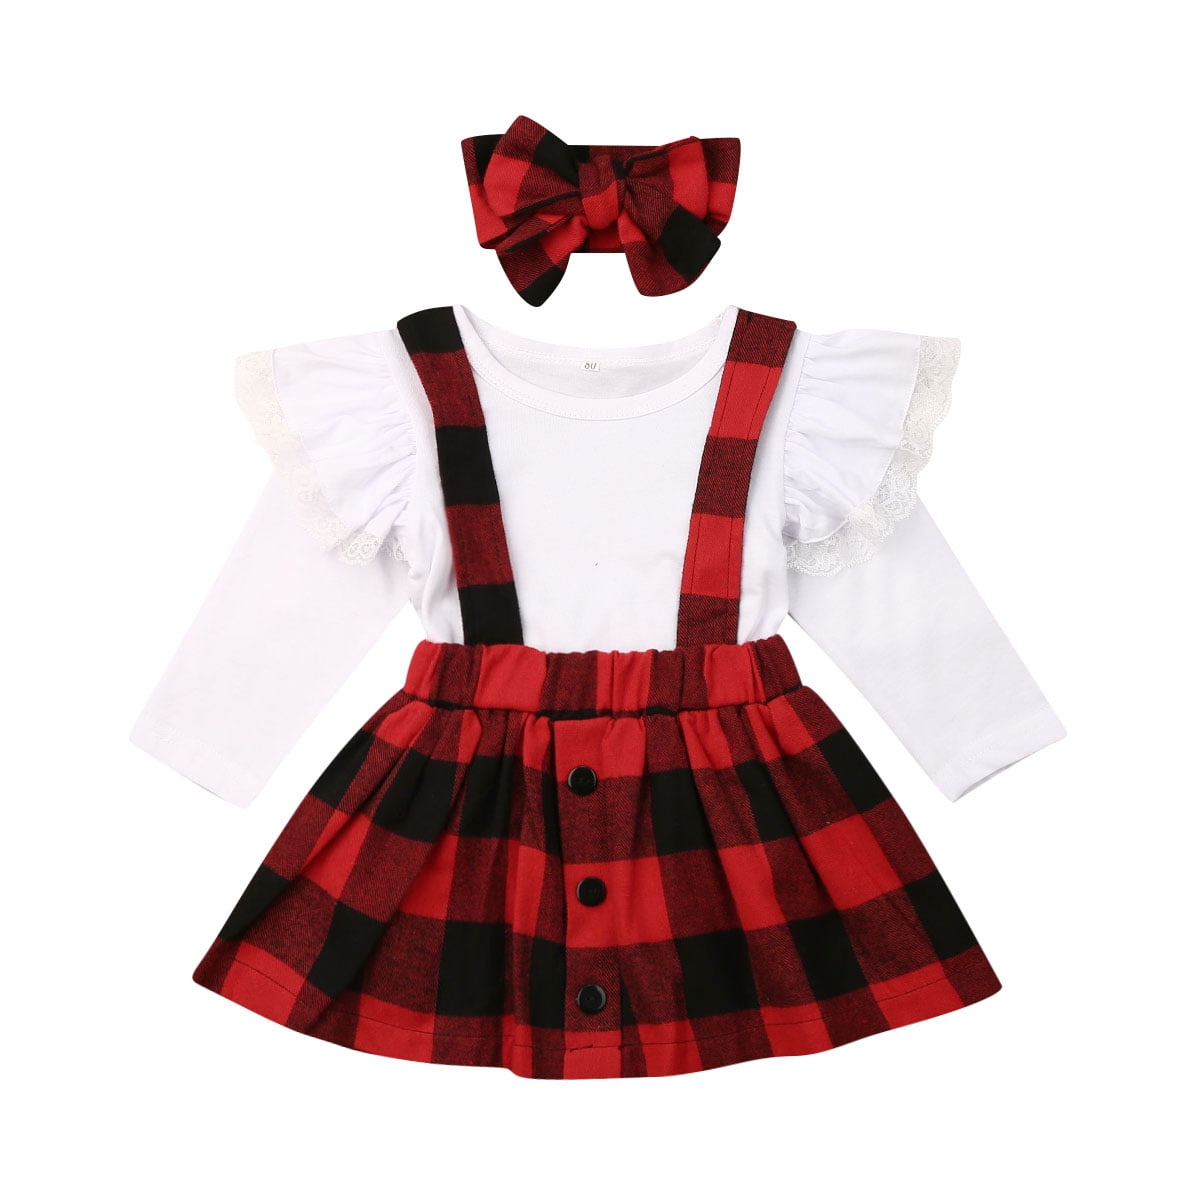 Douhoow Toddler Kids Baby Girls Suspender Skirt Ruffled Strap Sundress Overalls Outfit Clothes 